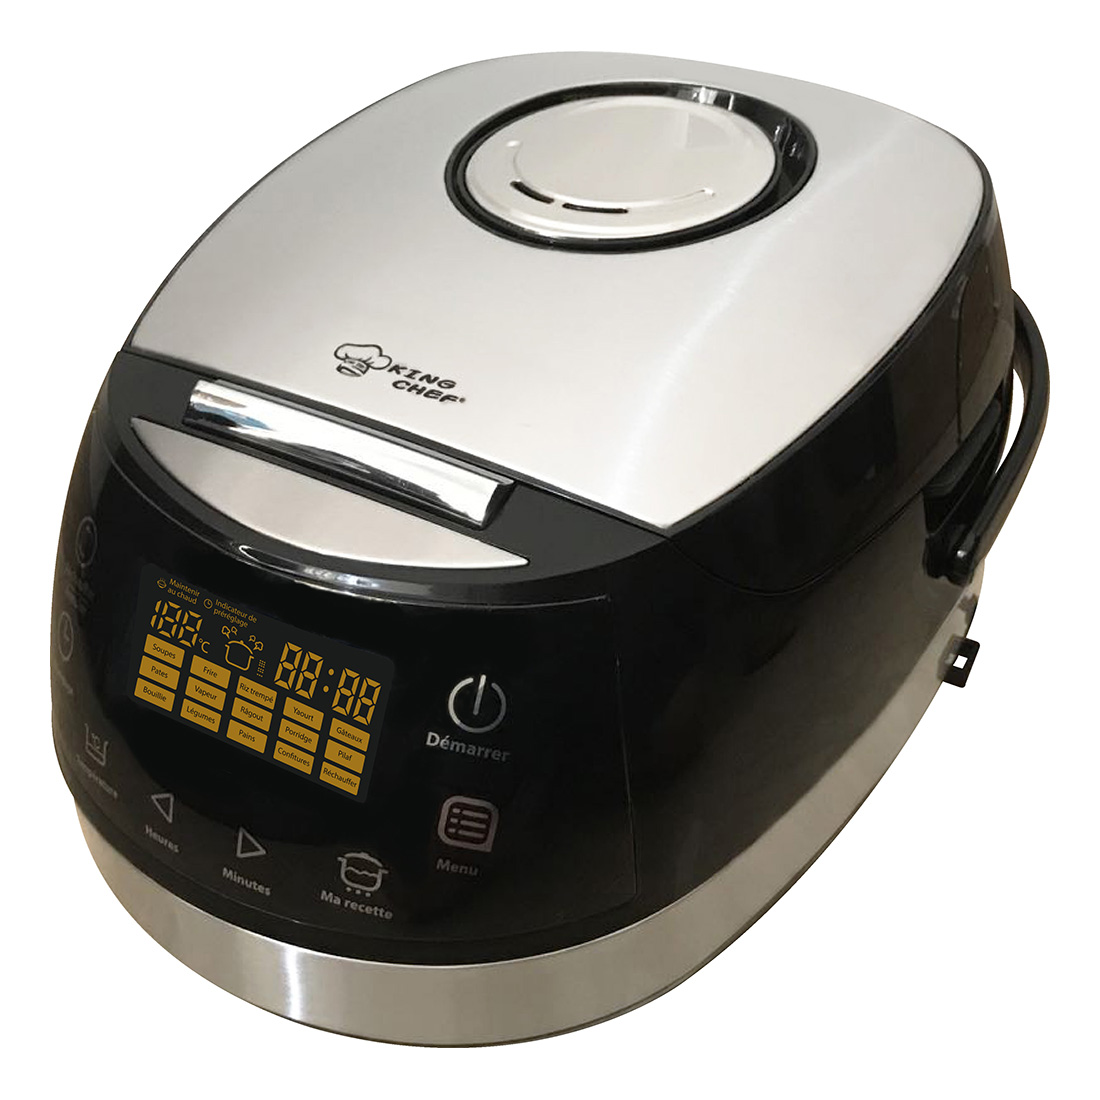 Cuiseur multifonctions 700W | BE-COOK 100 | KING CHEF